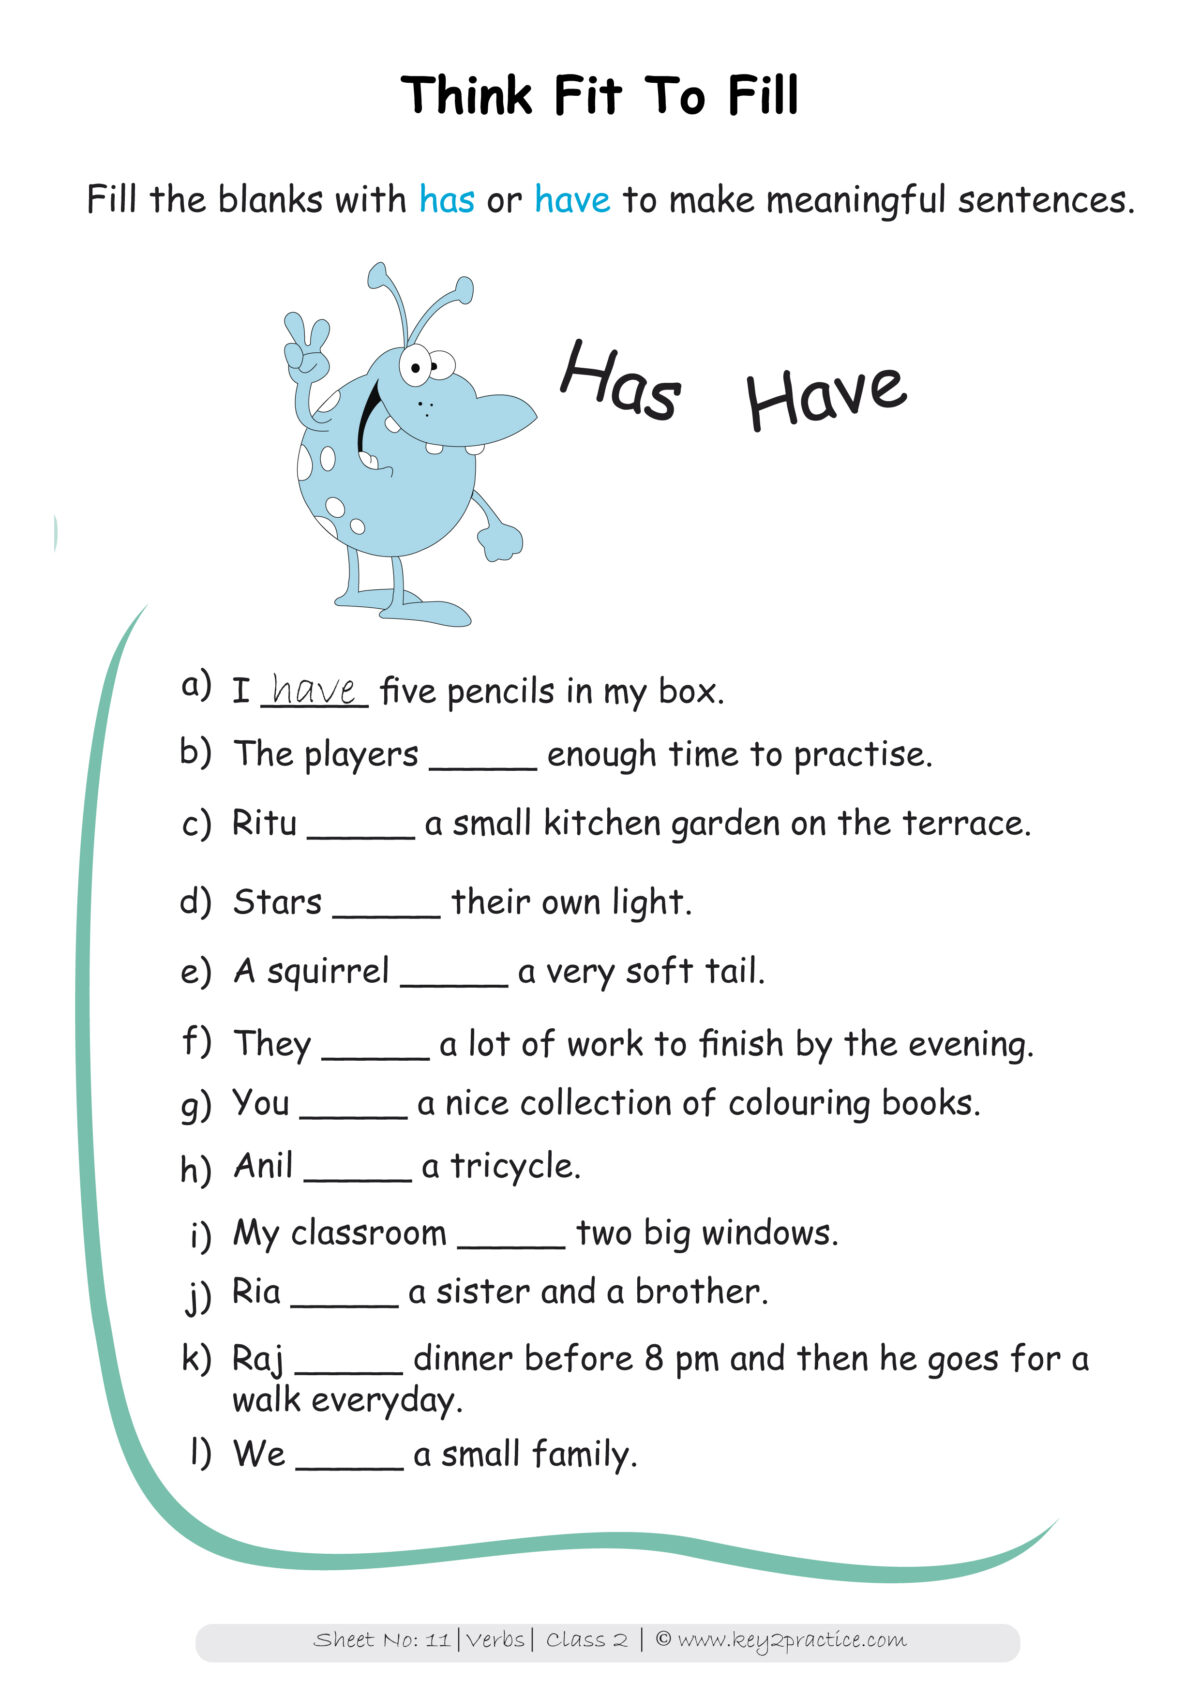 modal-auxiliary-verbs-worksheets-for-grade-5-3-your-home-teacher-modal-auxiliary-words